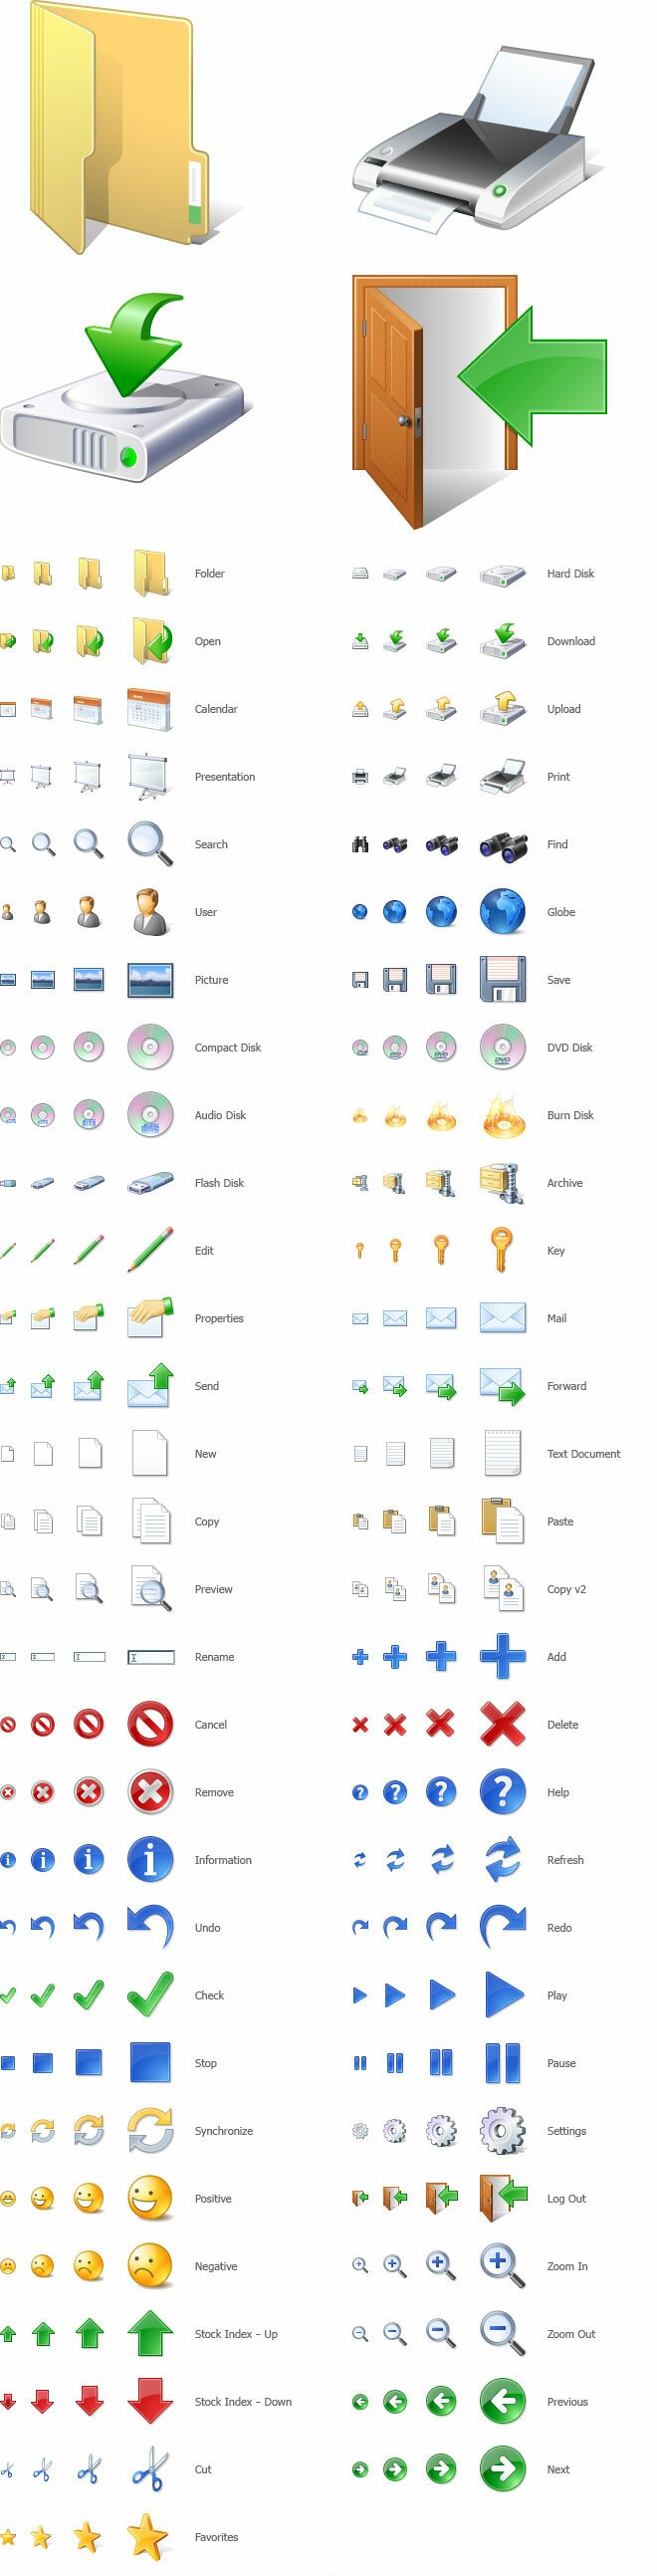 Windows Vista icons for everyday use. The most popular icons based on 5 years in icon design.